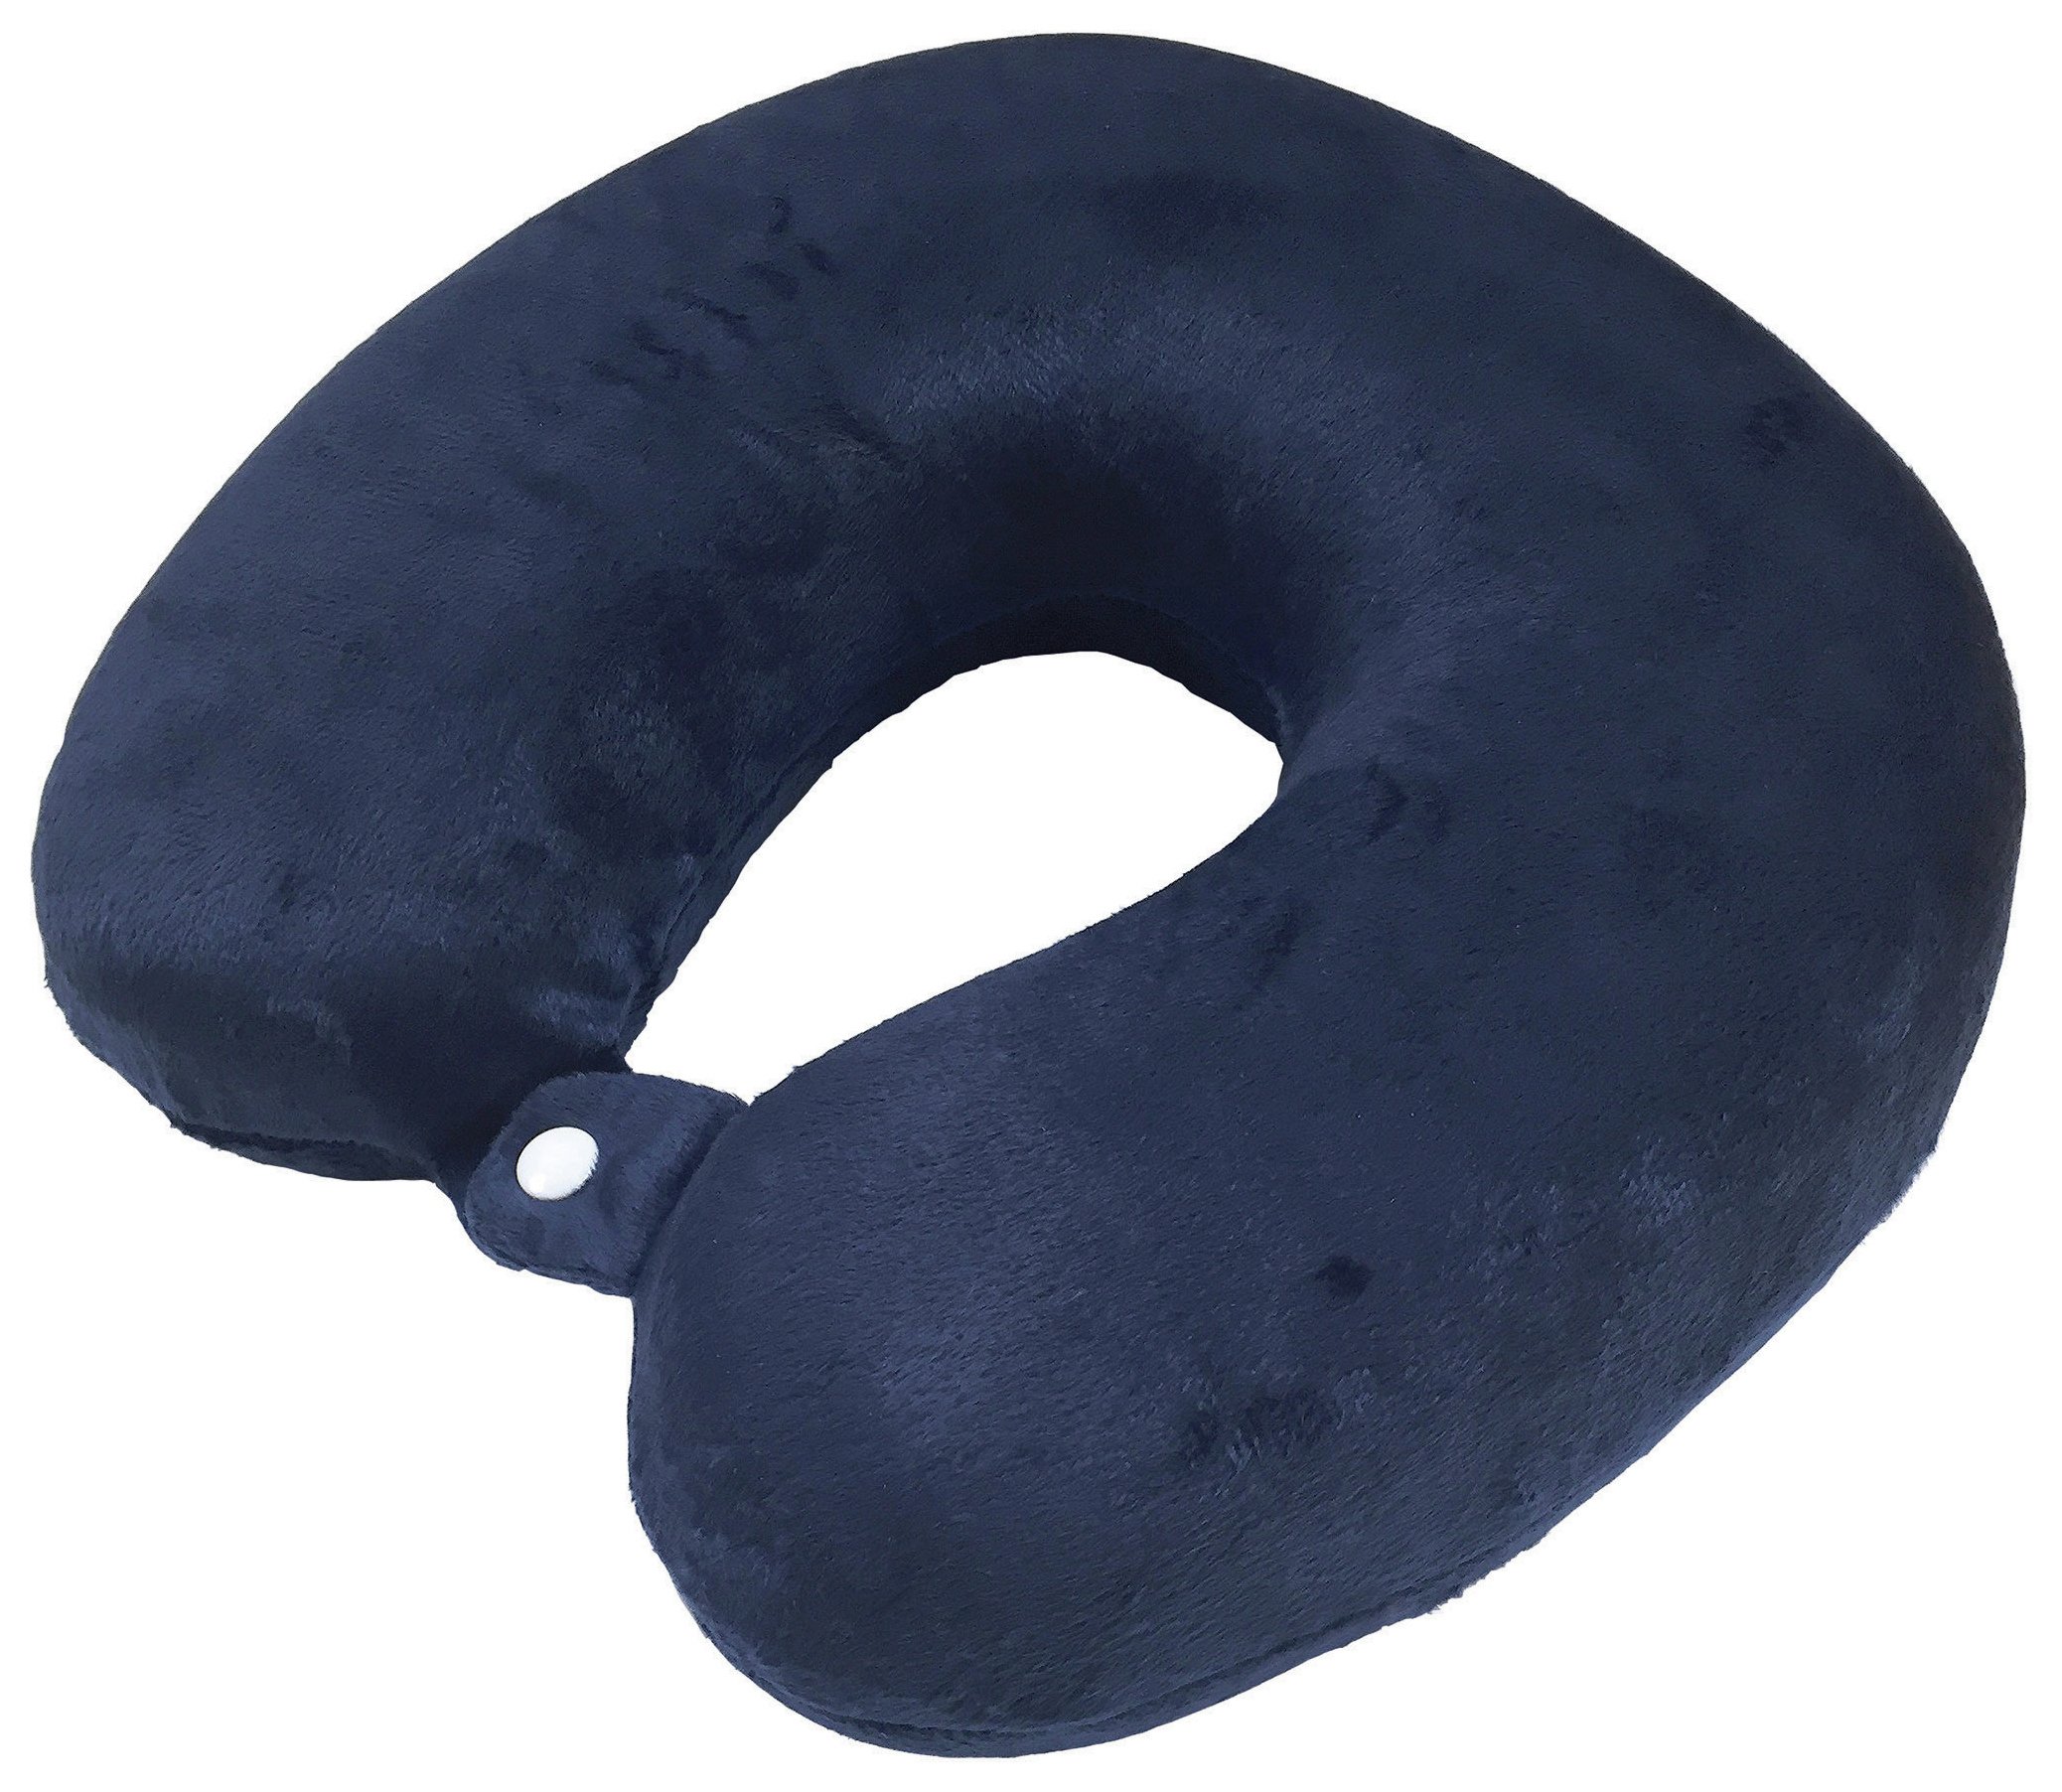 Streetwize Travel Neck Pillow With Clip